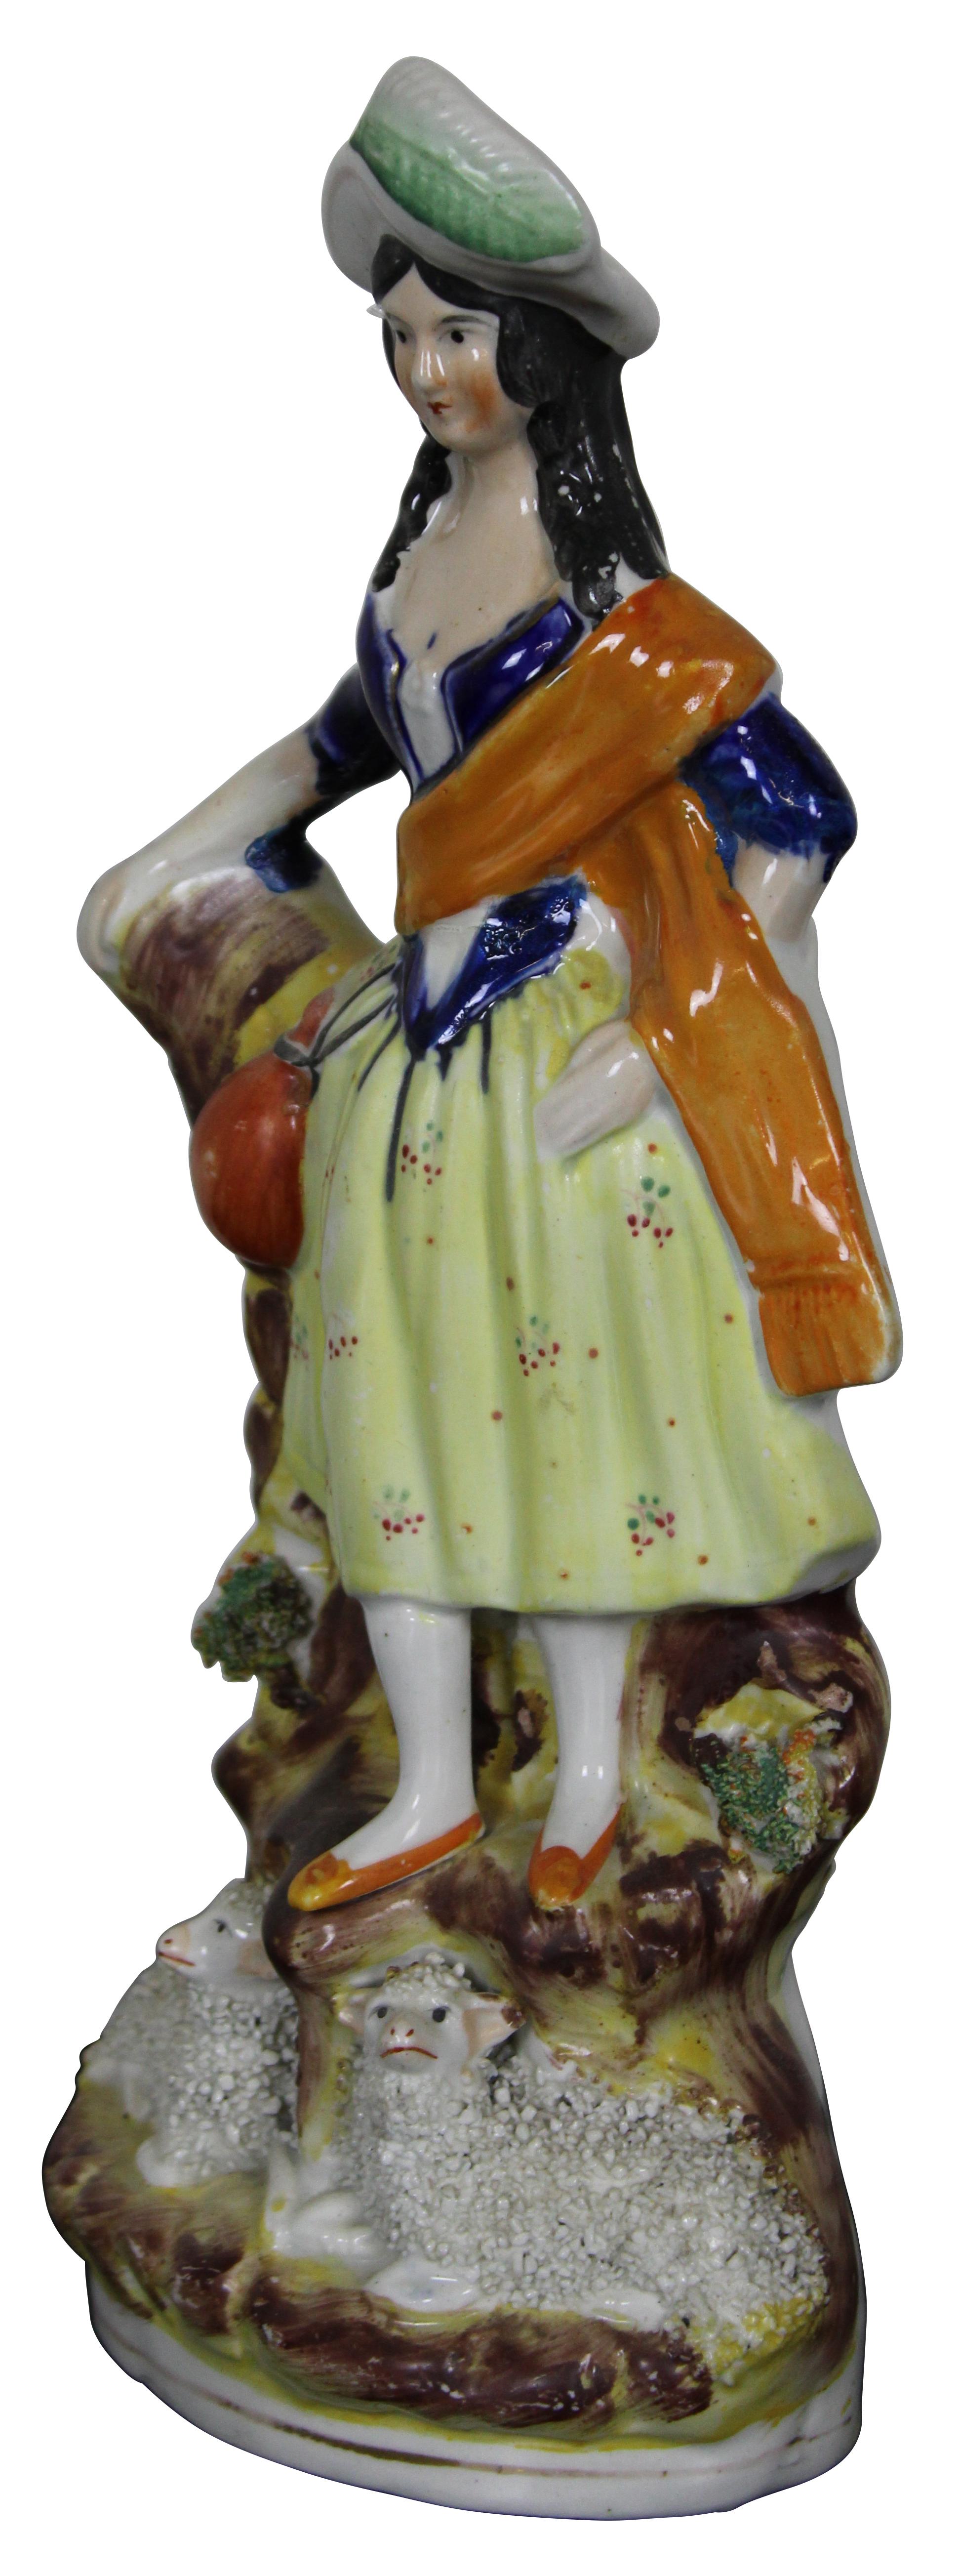 Antique 19th century English Staffordshire porcelain figurine in the shape of a Scottish woman standing by a tree stump, watching over a pair of textured sheep / lambs. 
     